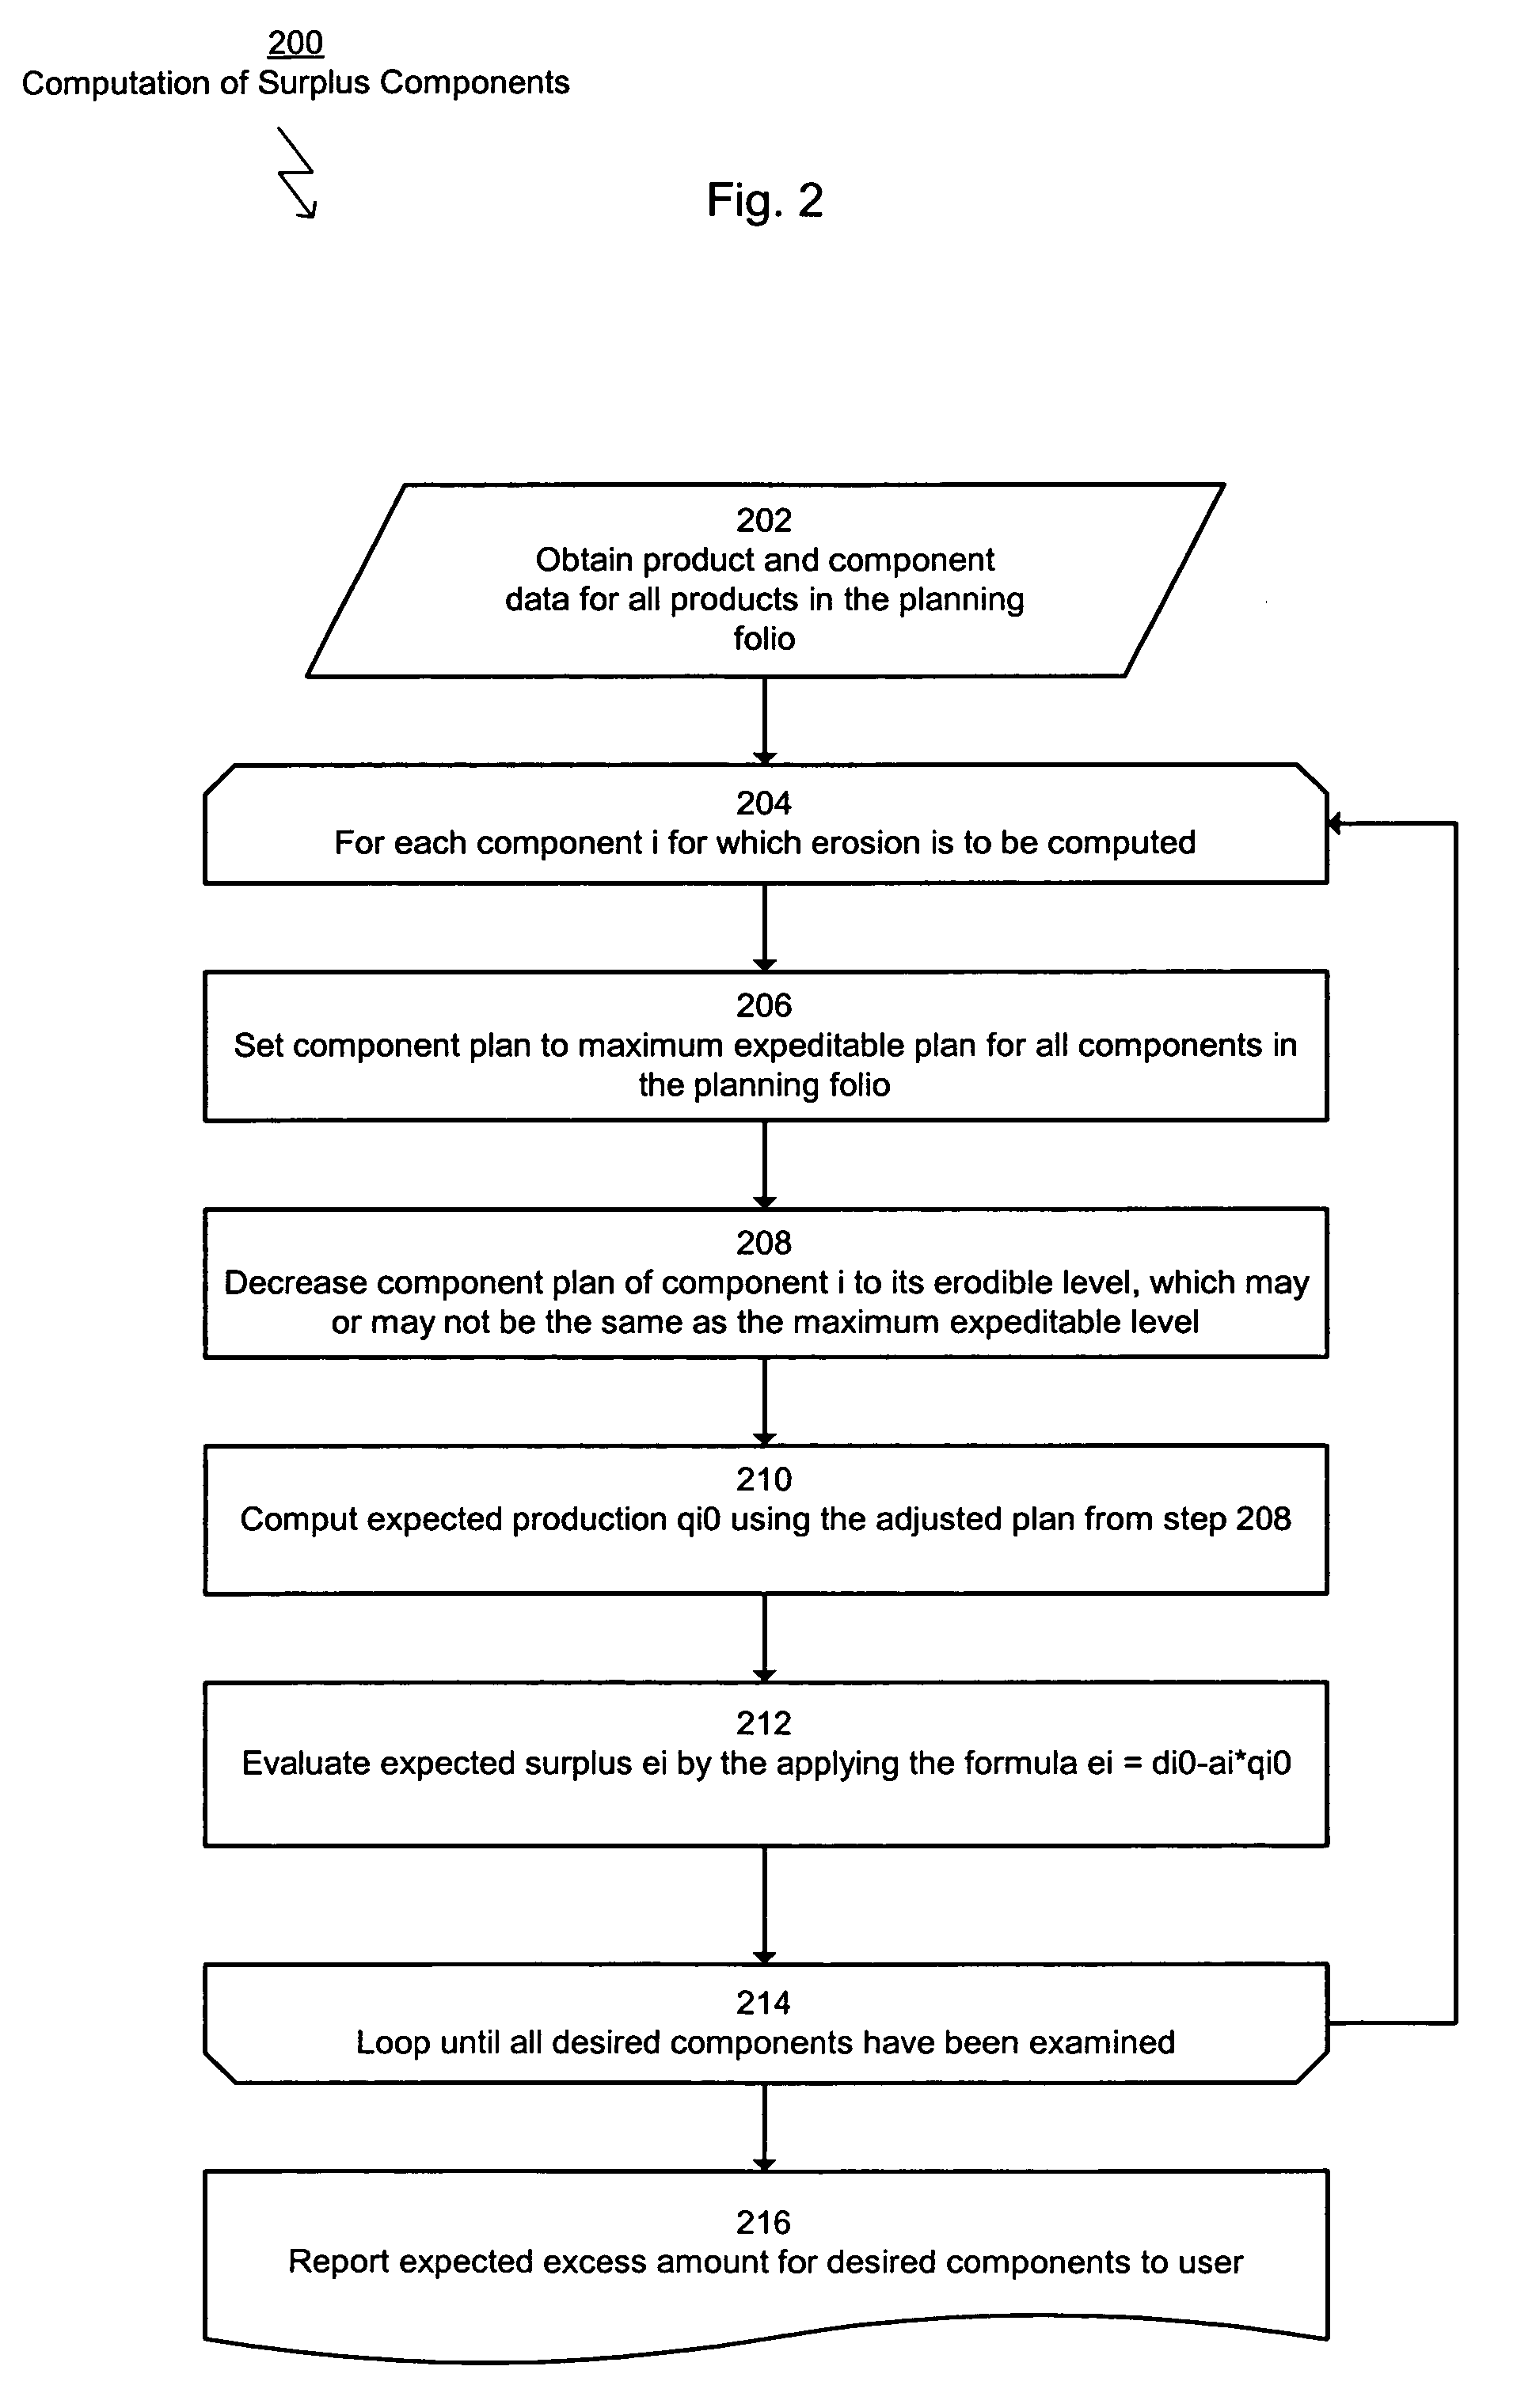 Method and business process for the estimation of erosion costs in assemble-to-order manufacturing operations